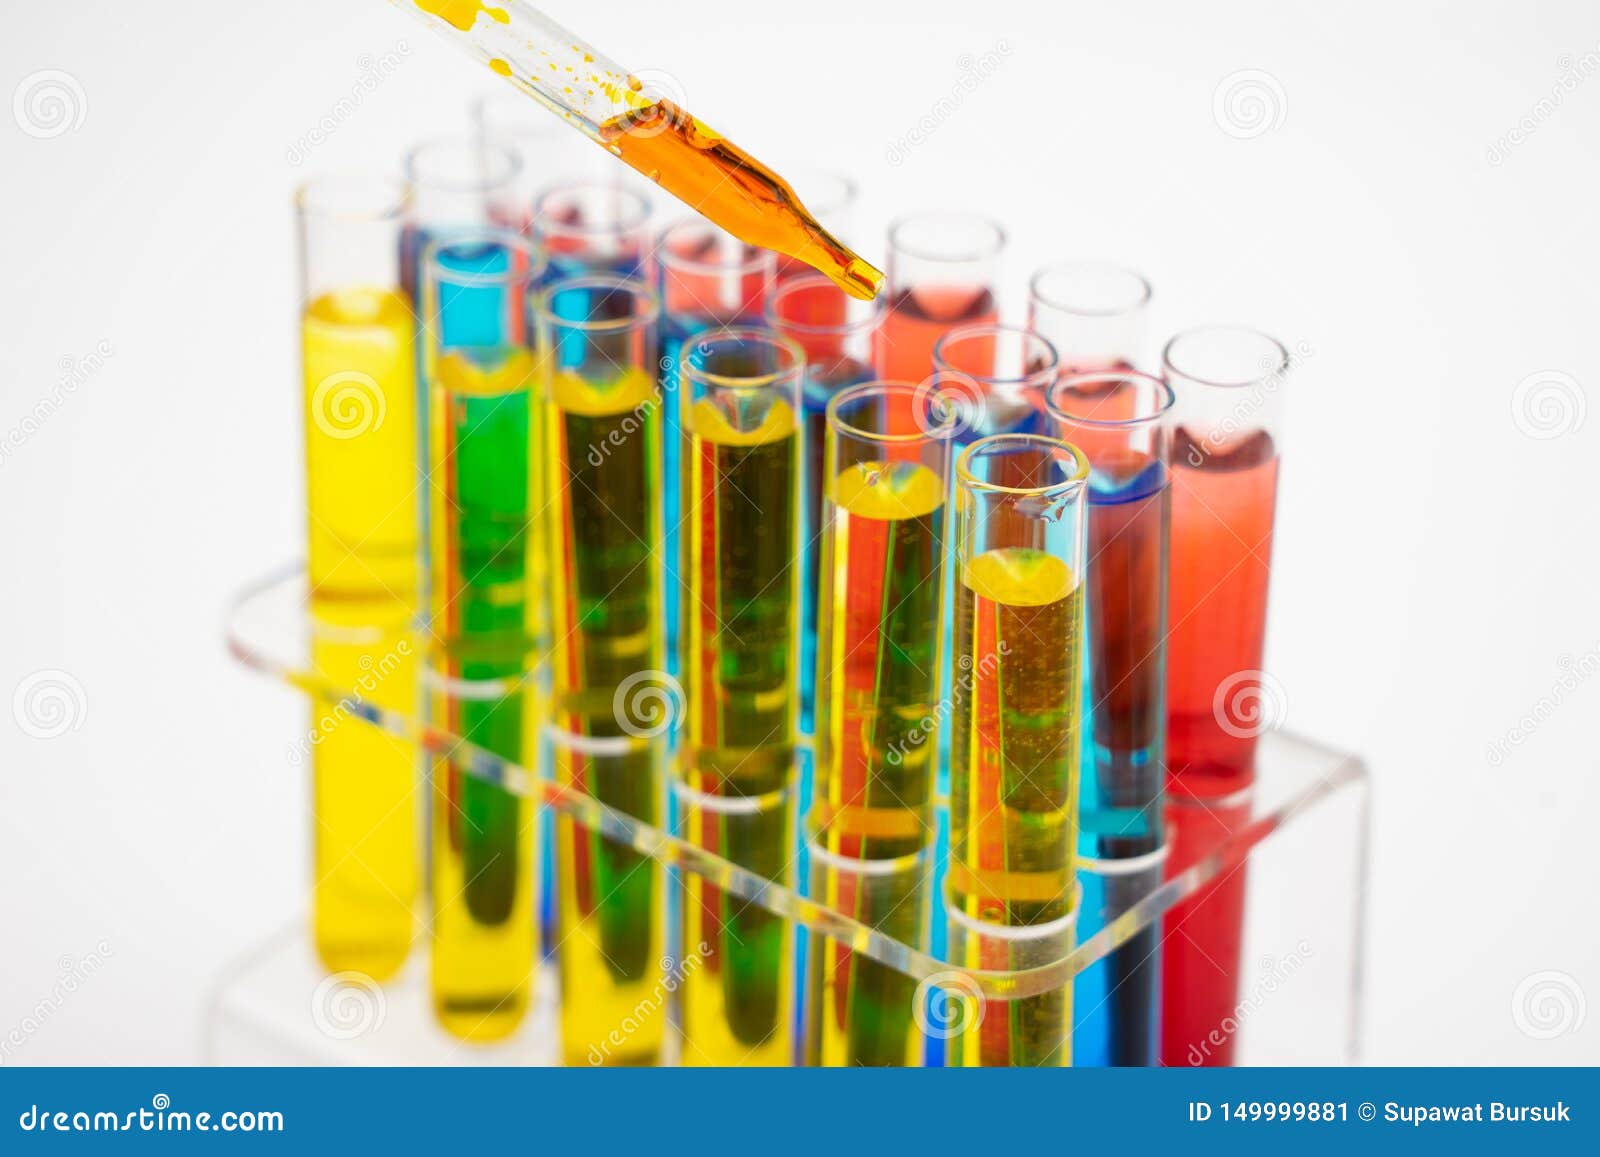 in the laboratory, scientists synthesized and analyzed the compound by dropping colored liquid in test tubes. white background